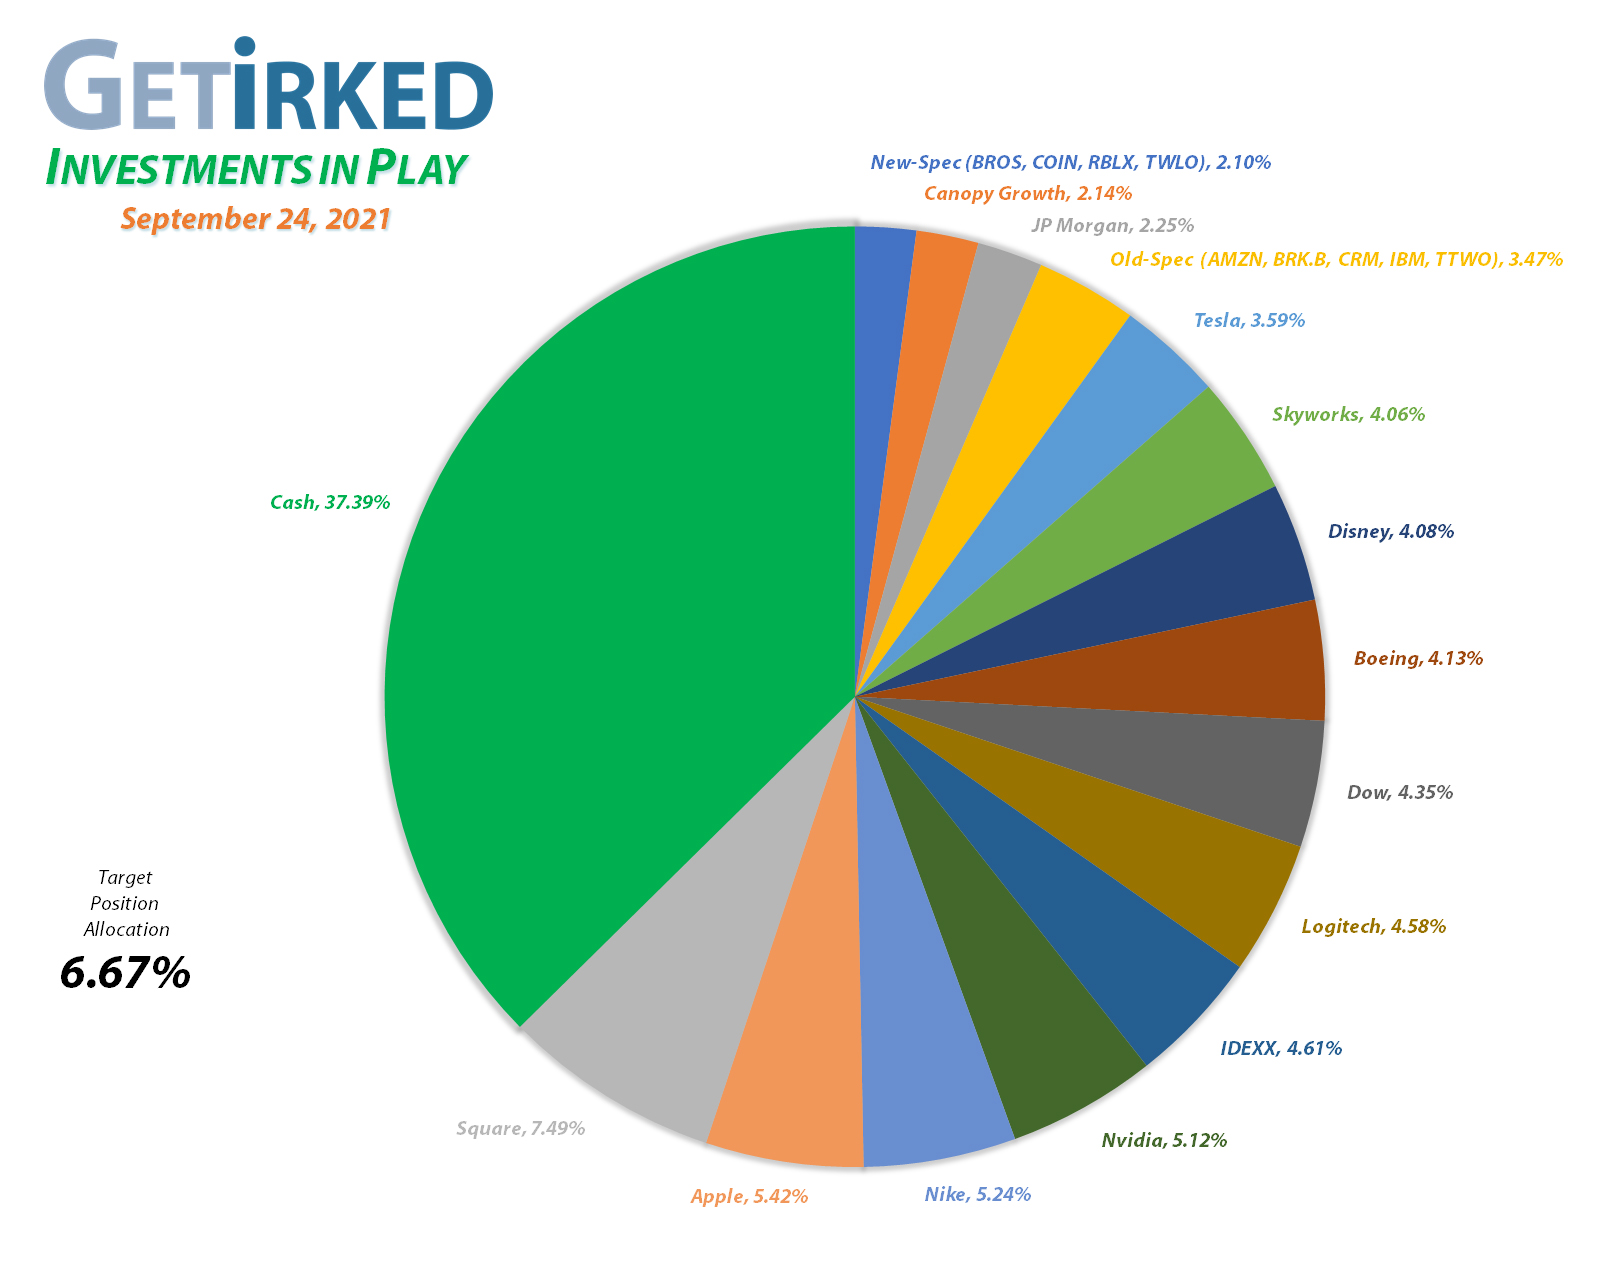 Get Irked - Investments in Play - Current Holdings - March 12, 2021et Irked's Pandemic Portfolio Holdings as of September 24, 2021